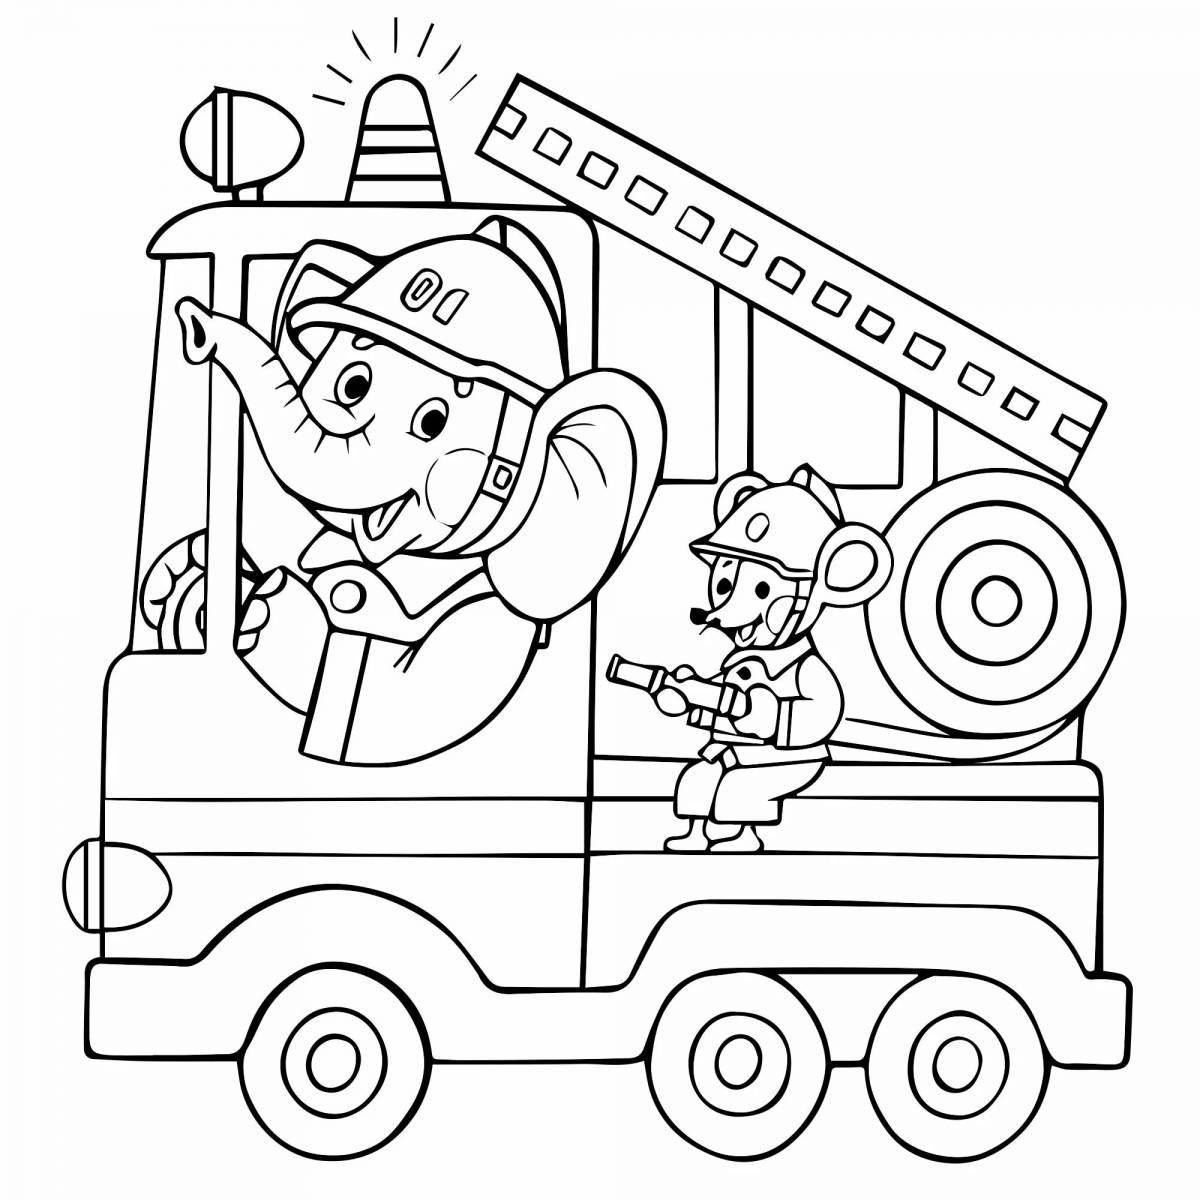 Fantastic fire safety coloring book for kids 6-7 years old